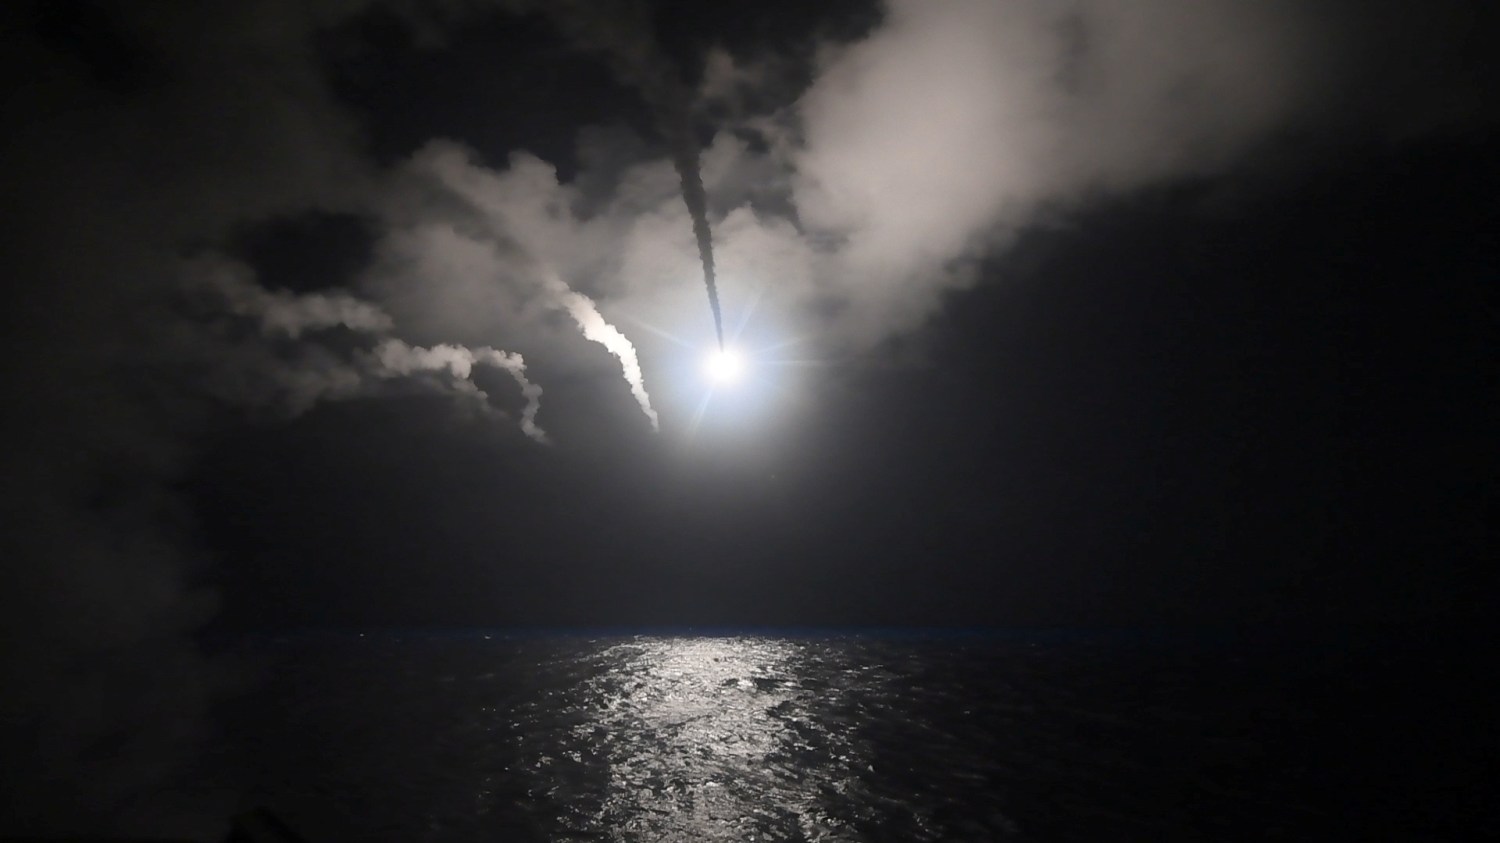 U.S. Navy guided-missile destroyer USS Porter (DDG 78) conducts strike operations while in the Mediterranean Sea which U.S. Defense Department said was a part of cruise missile strike against Syria on April 7, 2017. Ford Williams/Courtesy U.S. Navy/Handout via REUTERS ATTENTION EDITORS - THIS IMAGE WAS PROVIDED BY A THIRD PARTY. EDITORIAL USE ONLY. TPX IMAGES OF THE DAY - RTX34HGZ